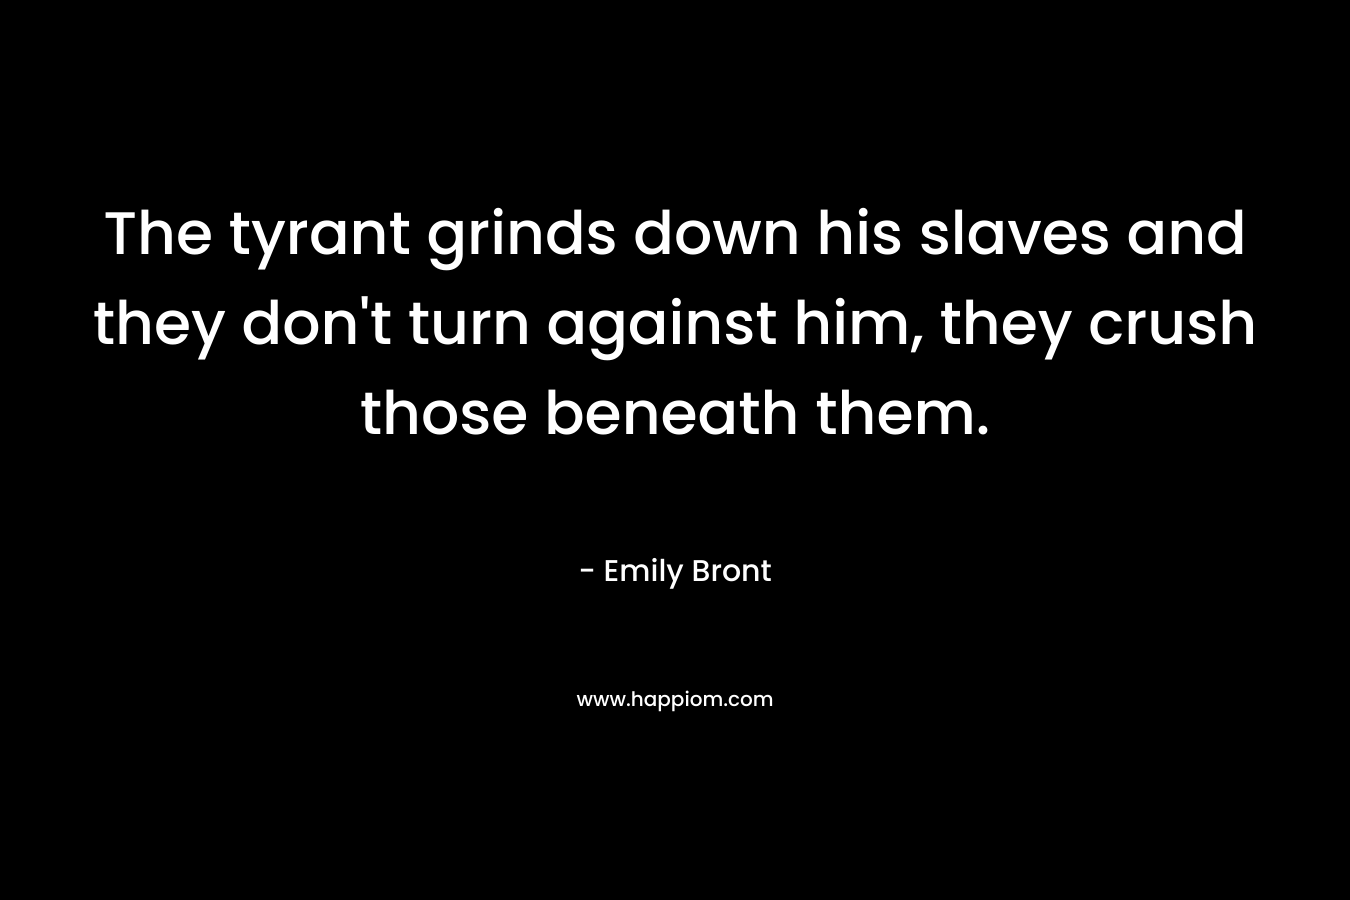 The tyrant grinds down his slaves and they don't turn against him, they crush those beneath them.